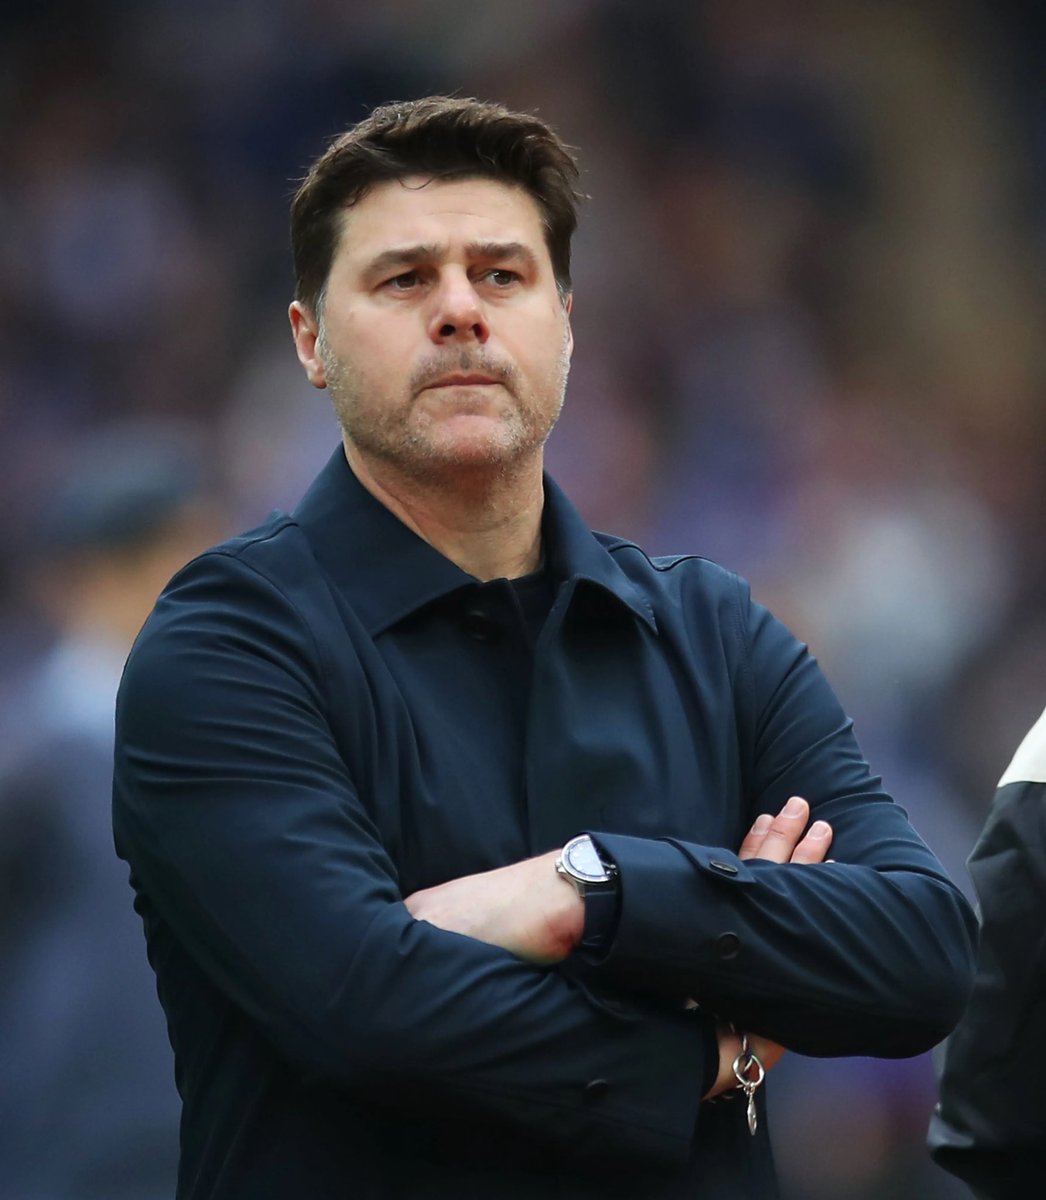 🔵 Pochettino: “It’s a good challenge if Palmer is not available vs Arsenal”. “If I were them, I would be motivated to go there tomorrow and show that this is Chelsea Football Club, not Cole Palmer Football Club”. ❗️👀